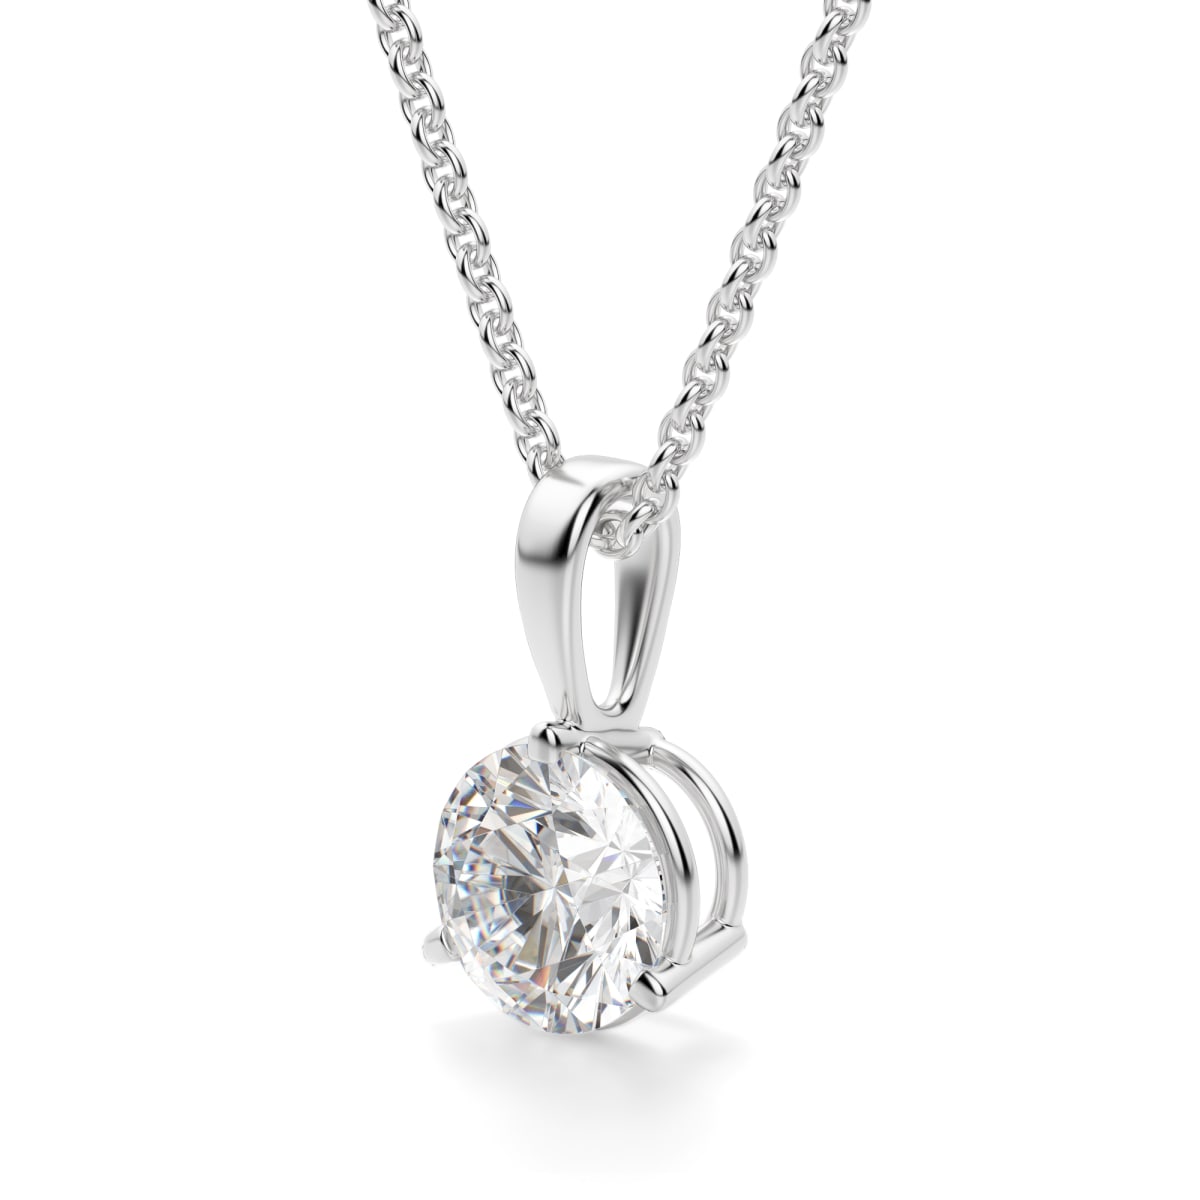 Round Cut 3 Prong Basket Set Pendant with Sterling Silver Cable Chain